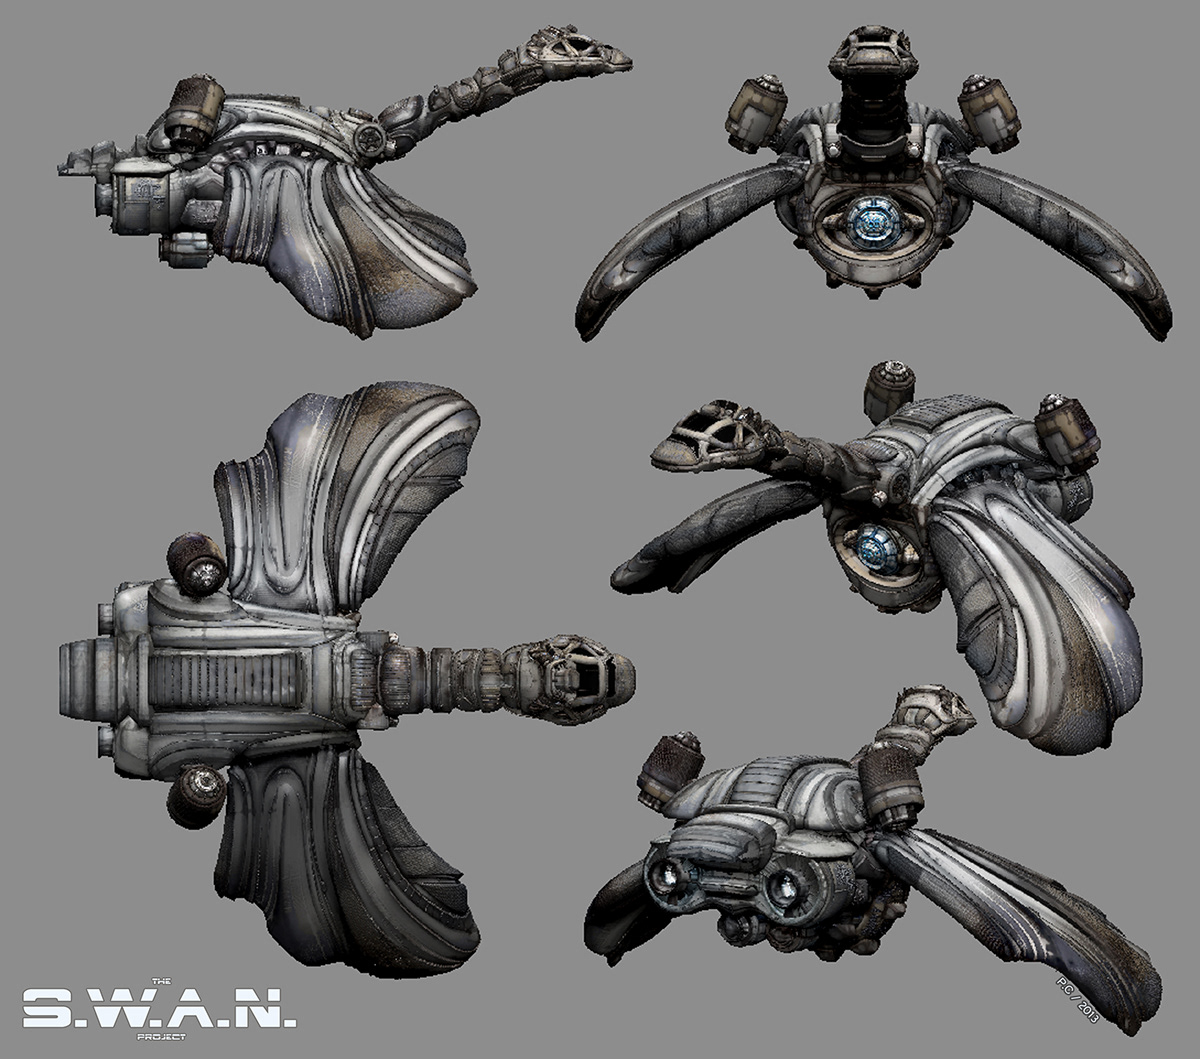 Unity games 3dmax Zbrush4r5 Sci/Fi Ships concept design The S.W.A.N Project